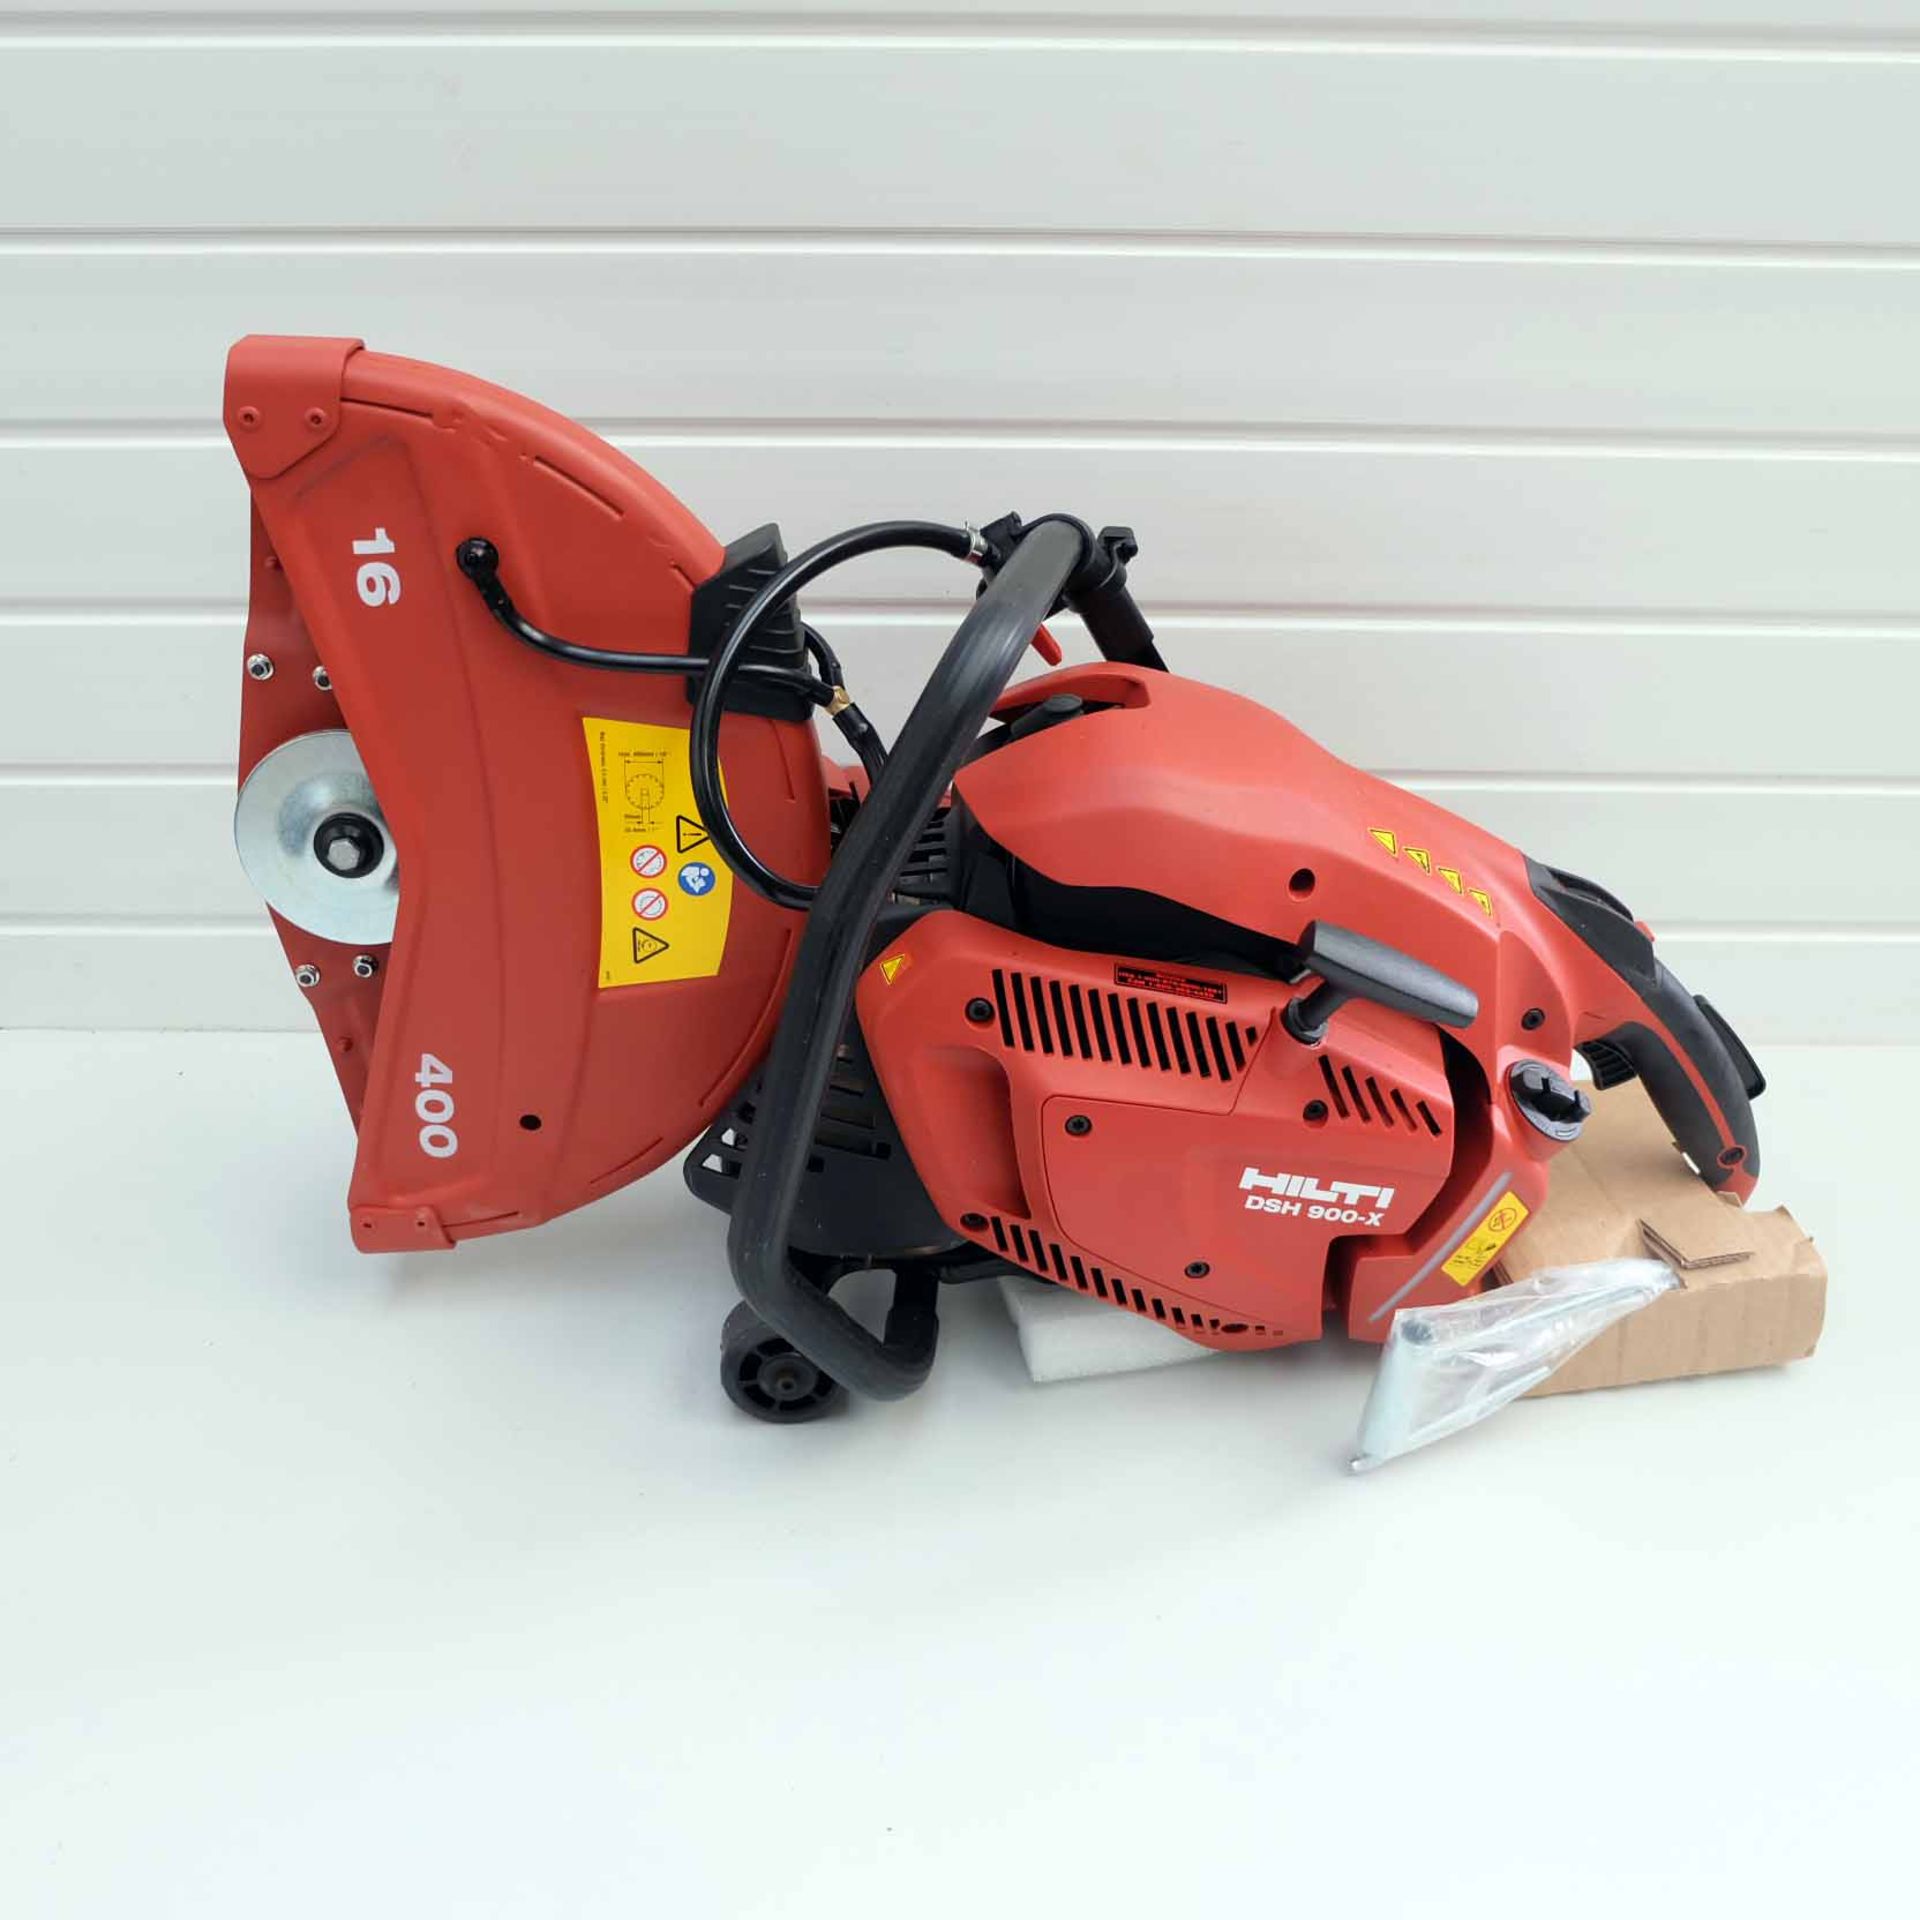 Hilti Hand Held Gas Saw. Model DSH 900-X 16". Complete With SP-16"x1" Blade. Easy Start Auto-Choke S - Image 3 of 25